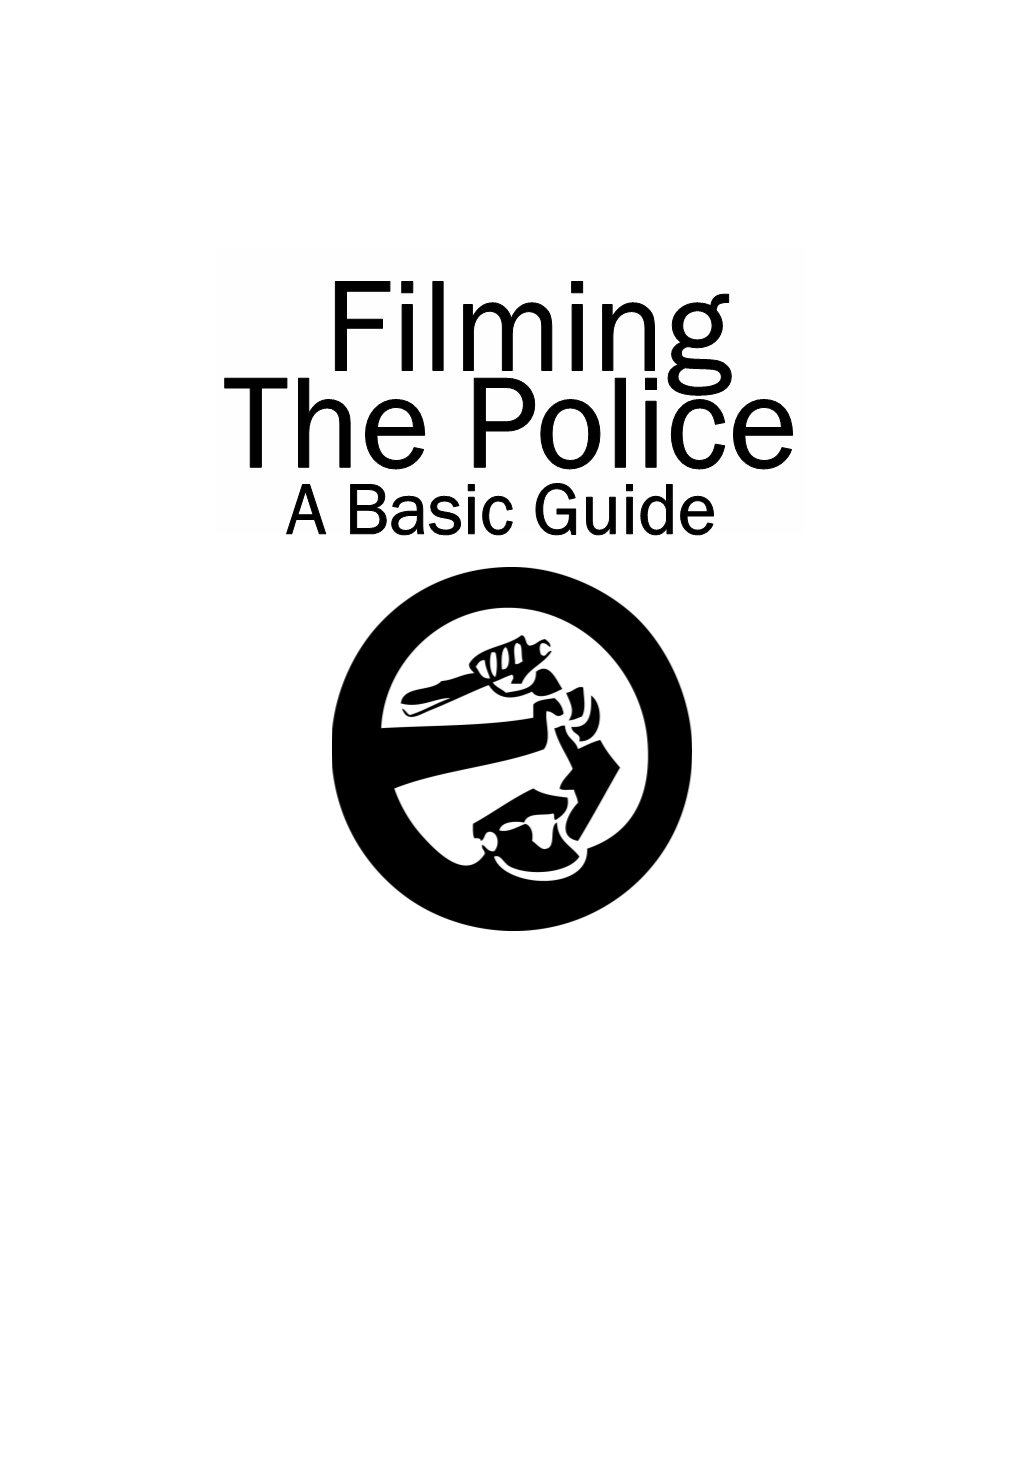 Filming the Police a Basic Guide